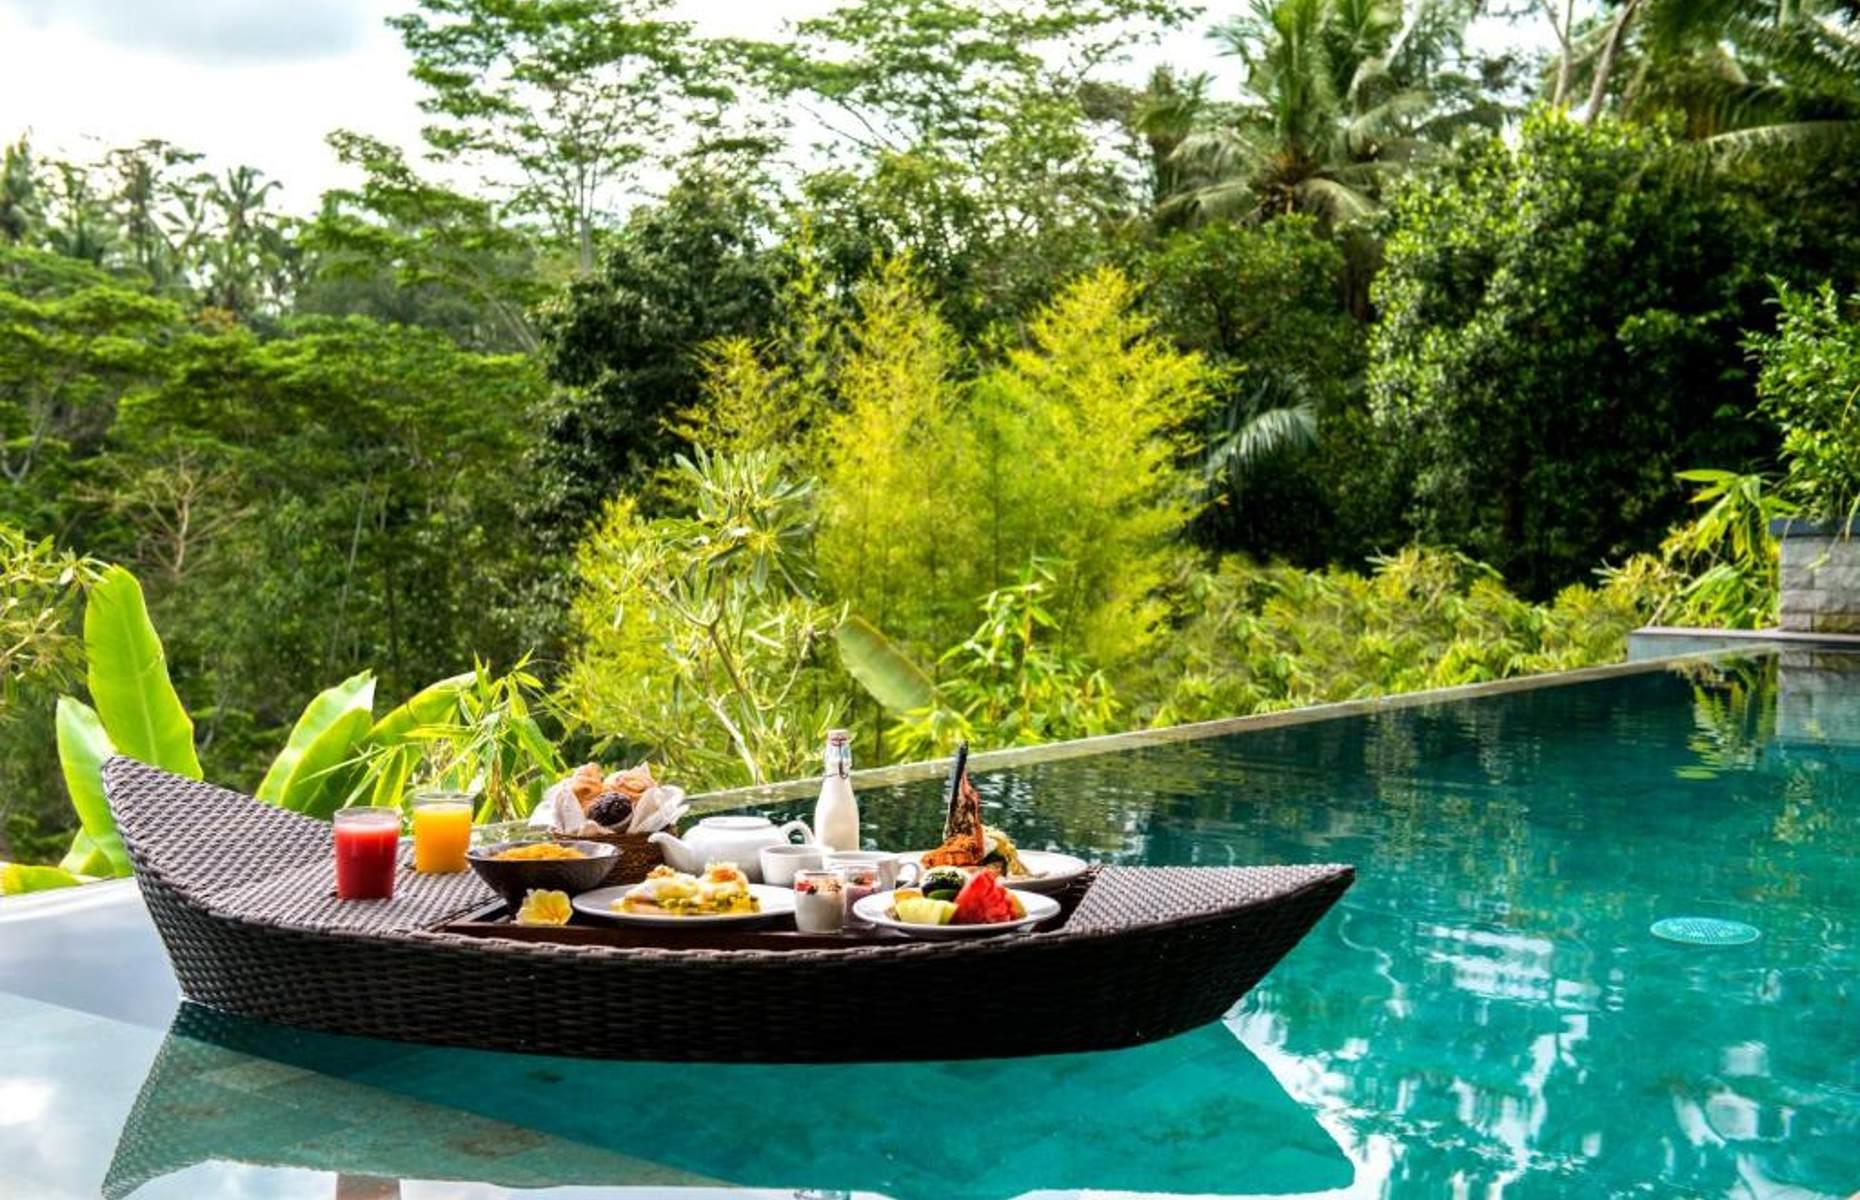 <p>Bali is the motherland of the famous floating breakfast, where pool-dwellers can indulge in a delicious morning spread without even having to reach for their towel. The <a href="https://www.booking.com/hotel/id/samsara-ubud.en-gb.html?label=gen173nr-1DCAsoaEIMc2Ftc2FyYS11YnVkSDNYBGhQiAEBmAEJuAEXyAEM2AED6AEB-AECiAIBqAIDuAKrruaRBsACAdICJDVmMzA0ZjQzLWRjMmItNDg0OS1iYWZjLWFhNGI0MTRiMTdlN9gCBOACAQ;sid=6bd457d89898c64402b235d297ce50ac;dist=0&group_adults=2&group_children=0&keep_landing=1&no_rooms=1&sb_price_type=total&type=total&">Samsara Ubud</a> presents theirs in a crescent-shaped boat filled with sweet pastries, cakes, fresh jungle fruit and yogurt. Indonesian nasi uduk (steamed rice cooked in coconut milk), French toast and lobster eggs Benedict are also options. Those who prefer a static meal are more than welcome to dine at a table and breakfast is included with your villa booking.</p>